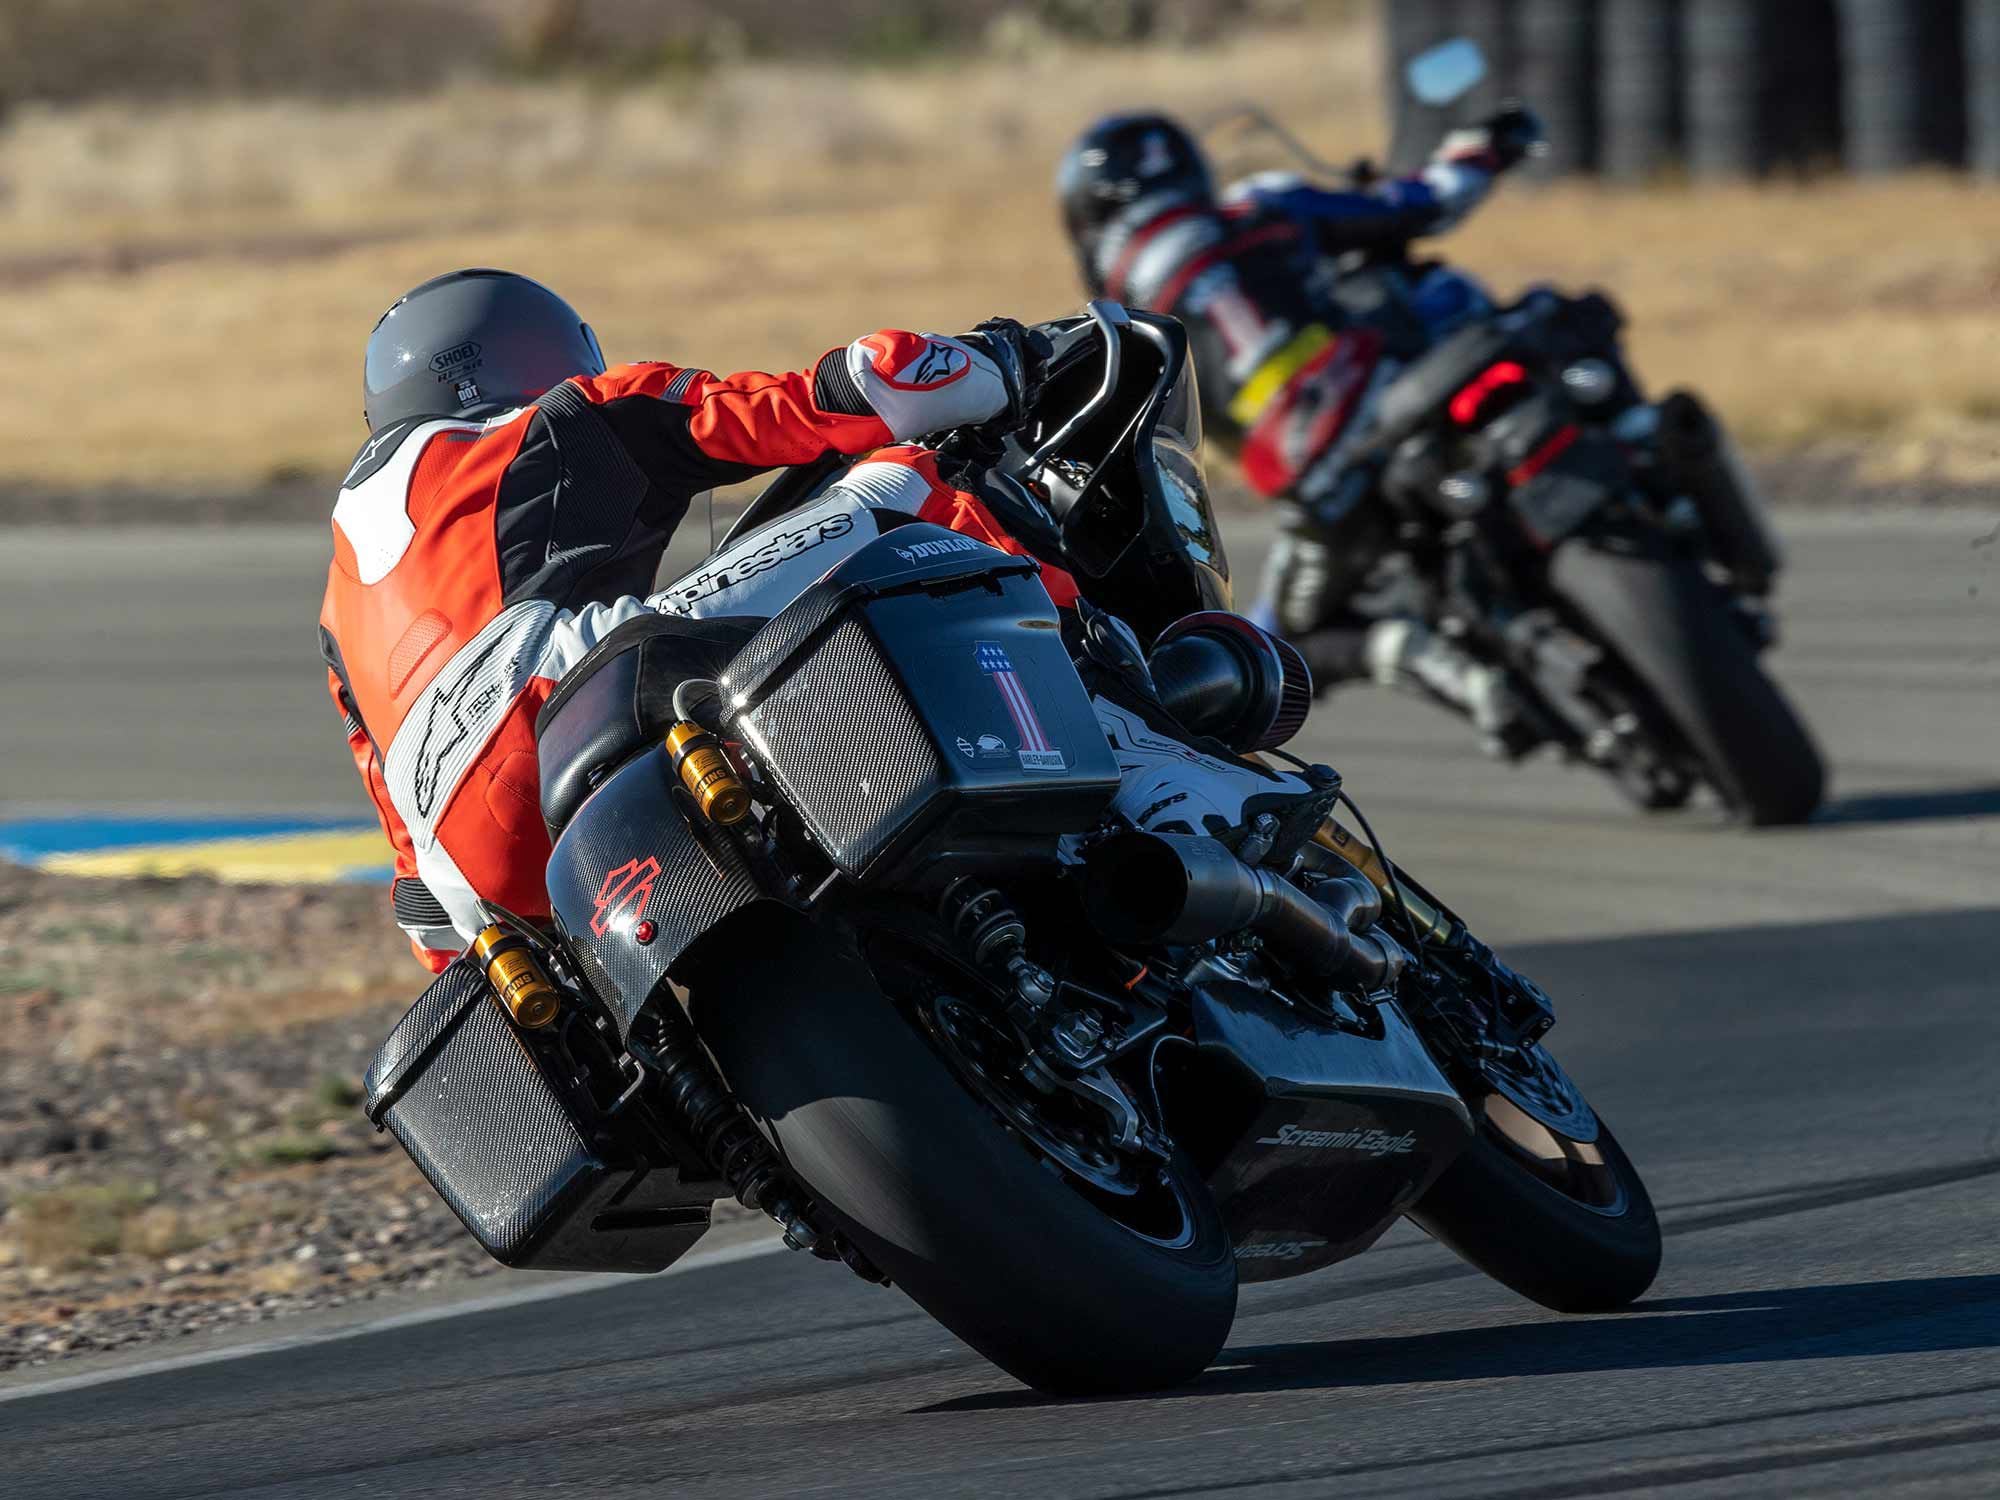 Who could have imagined the irony of chasing MotoAmerica King of the Baggers champion Kyle Wyman around a racetrack aboard a factory-built high-performance bagger while he’s ripping a Harley-Davidson Pan America Special?